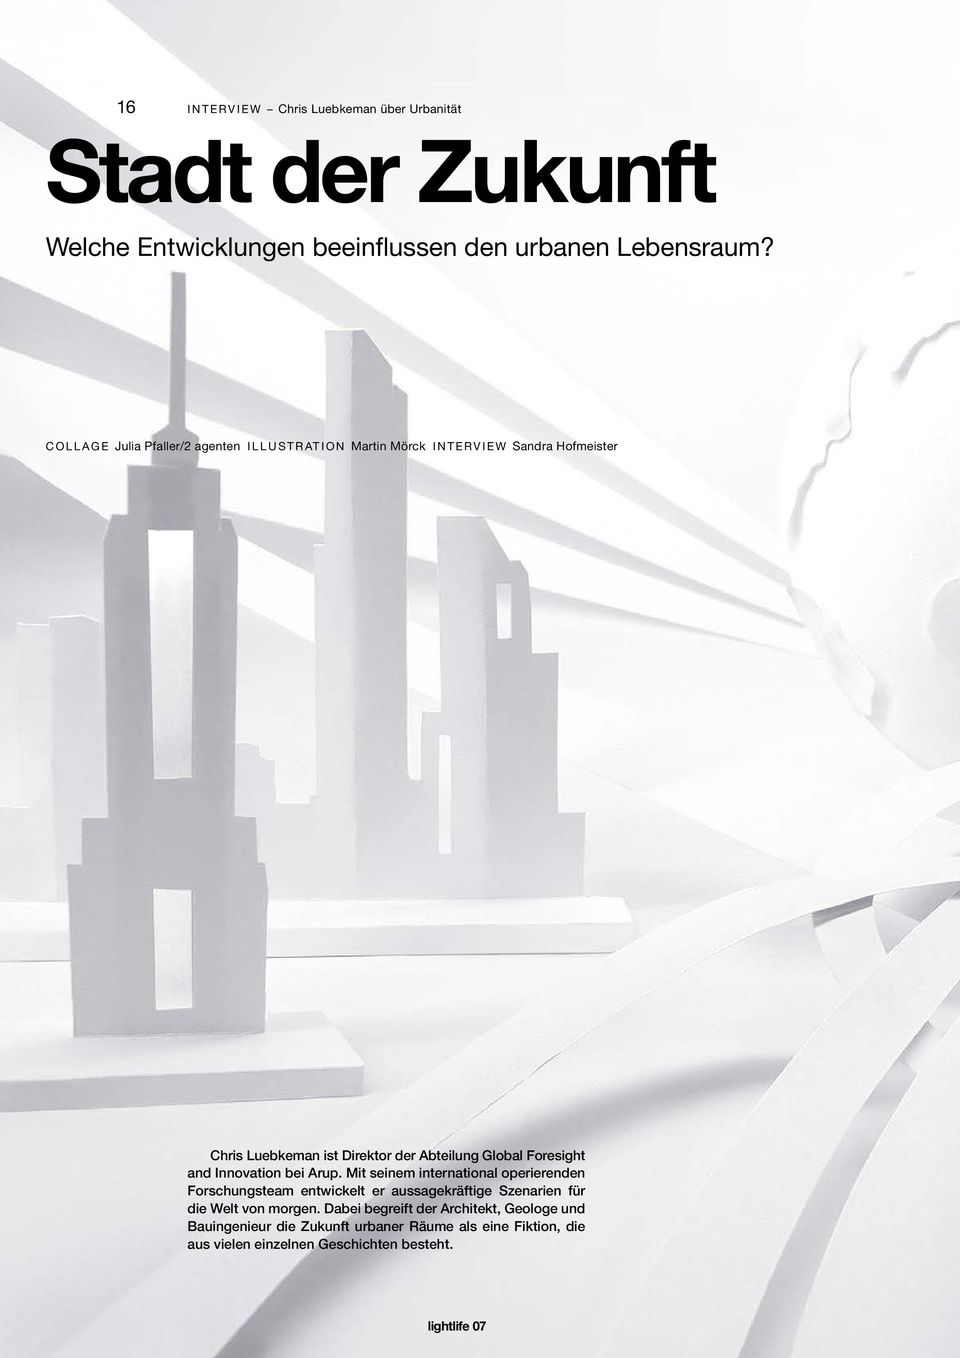 Foresight and Innovation bei Arup.